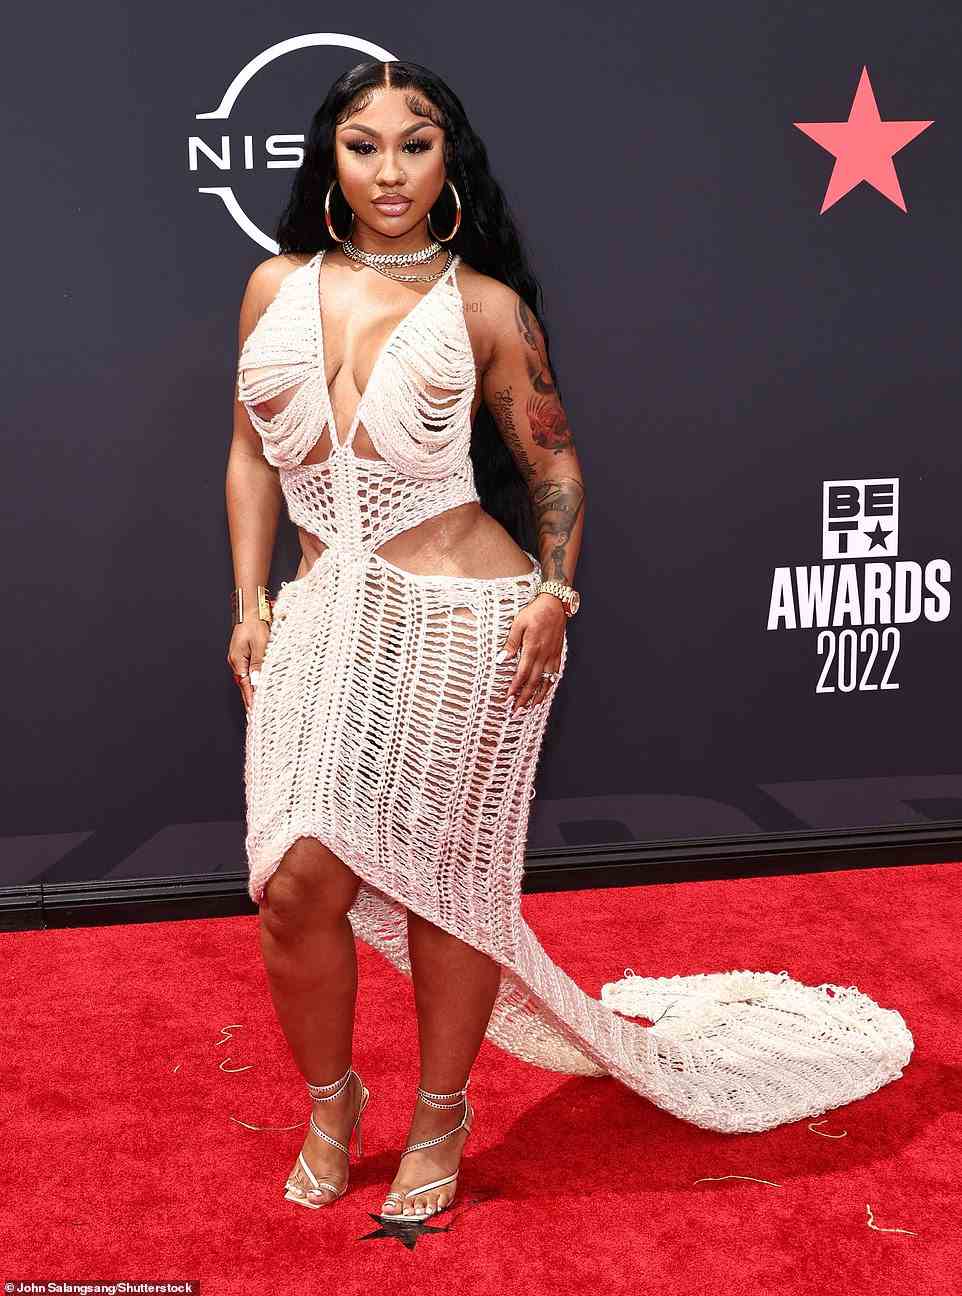 Crochet chic: Social media star Ari Fletcher, 26, put her curves on display in a white crochet dress with a train